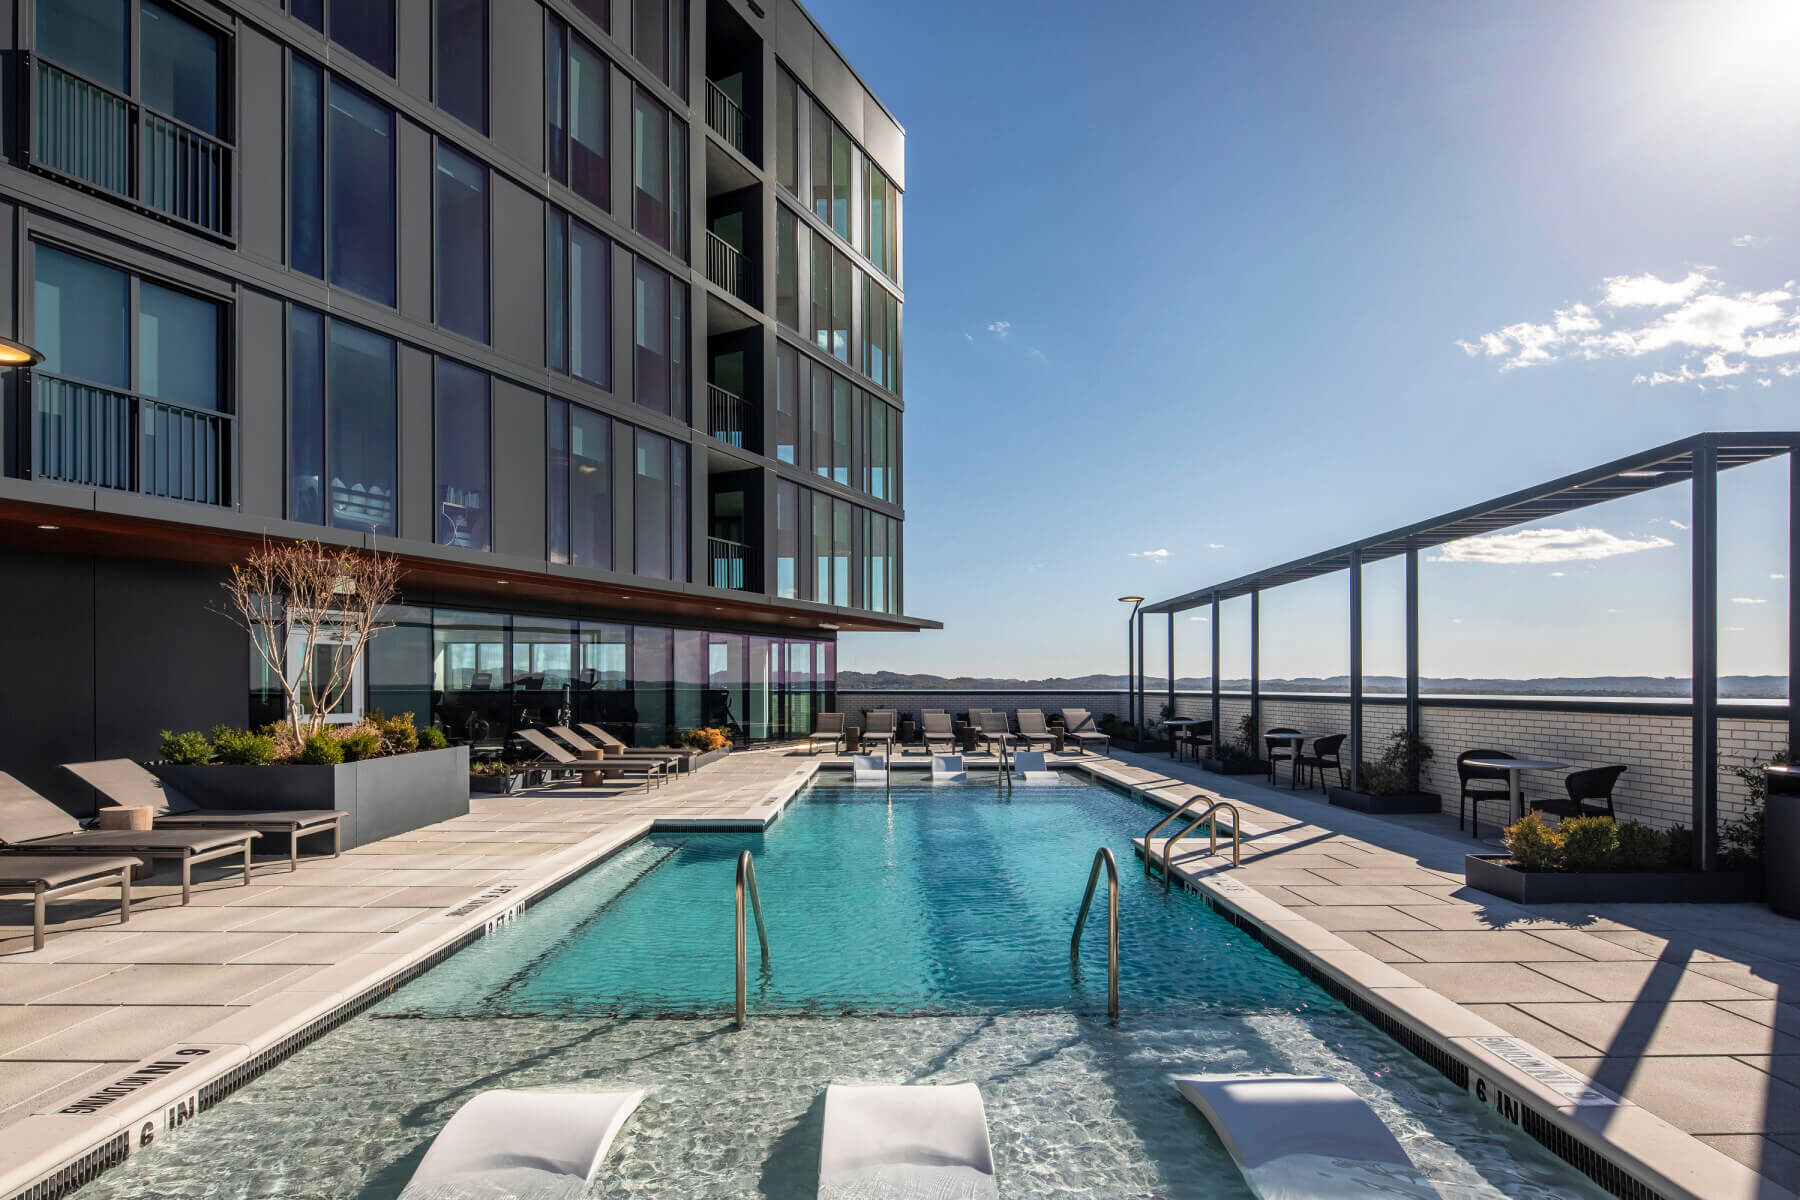 The Parke West residential tower pool and pool